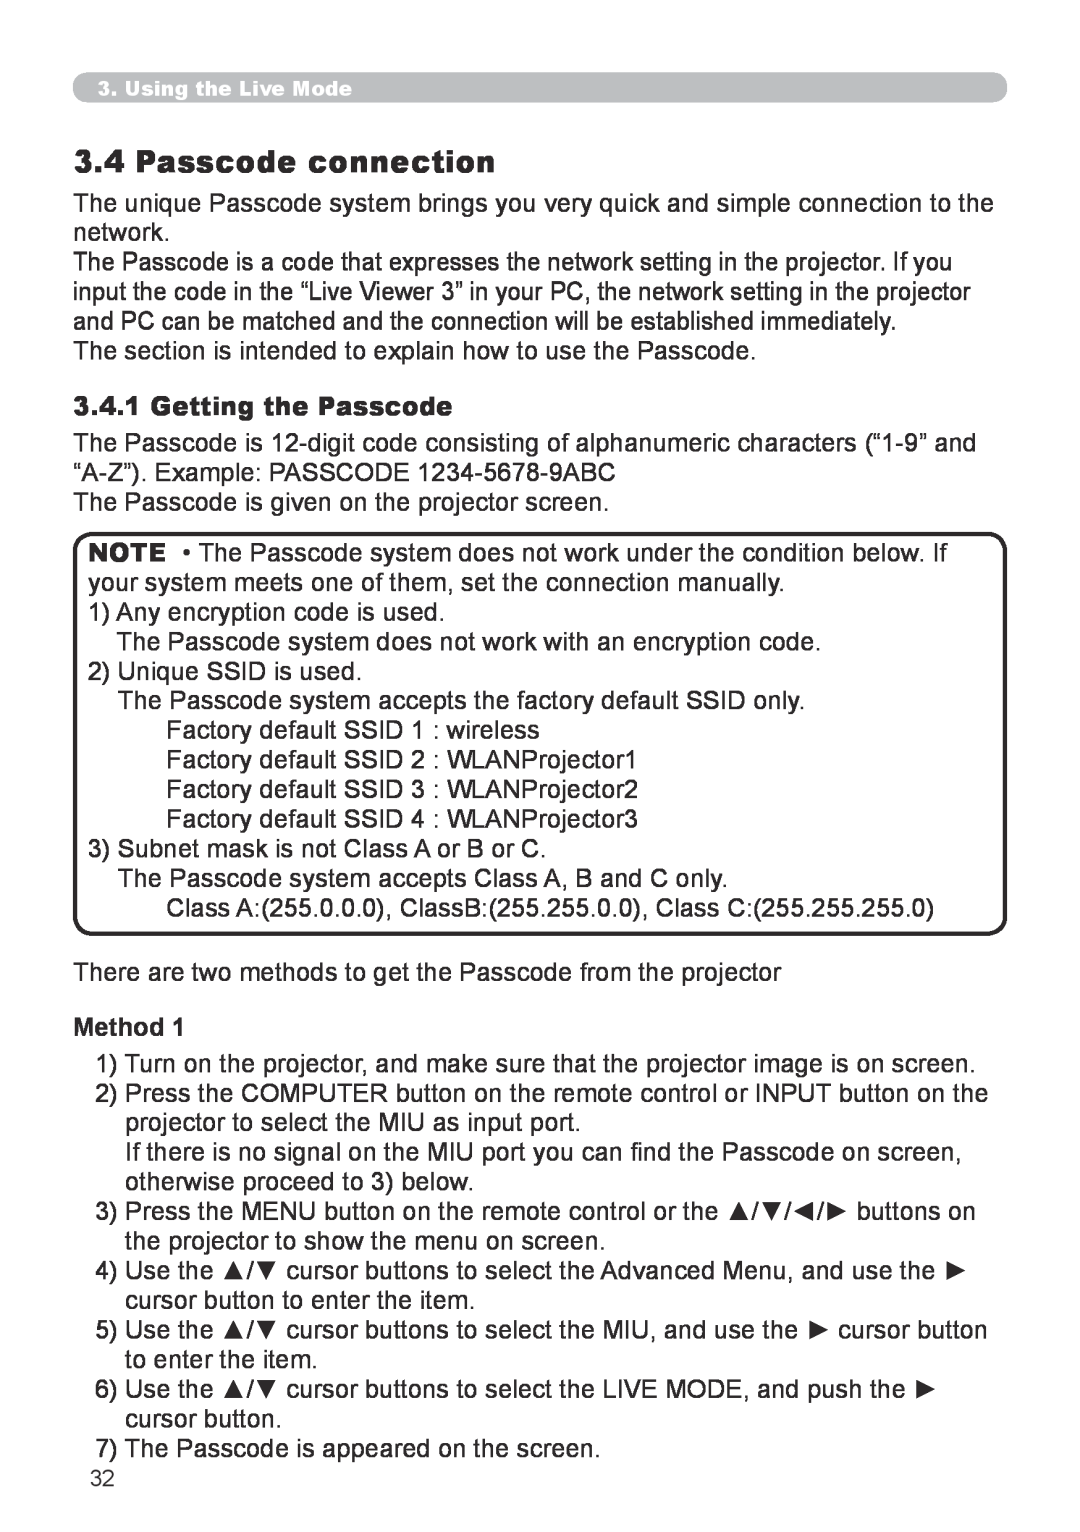 Hitachi CP-X267 user manual Passcode connection, Getting the Passcode, Method 